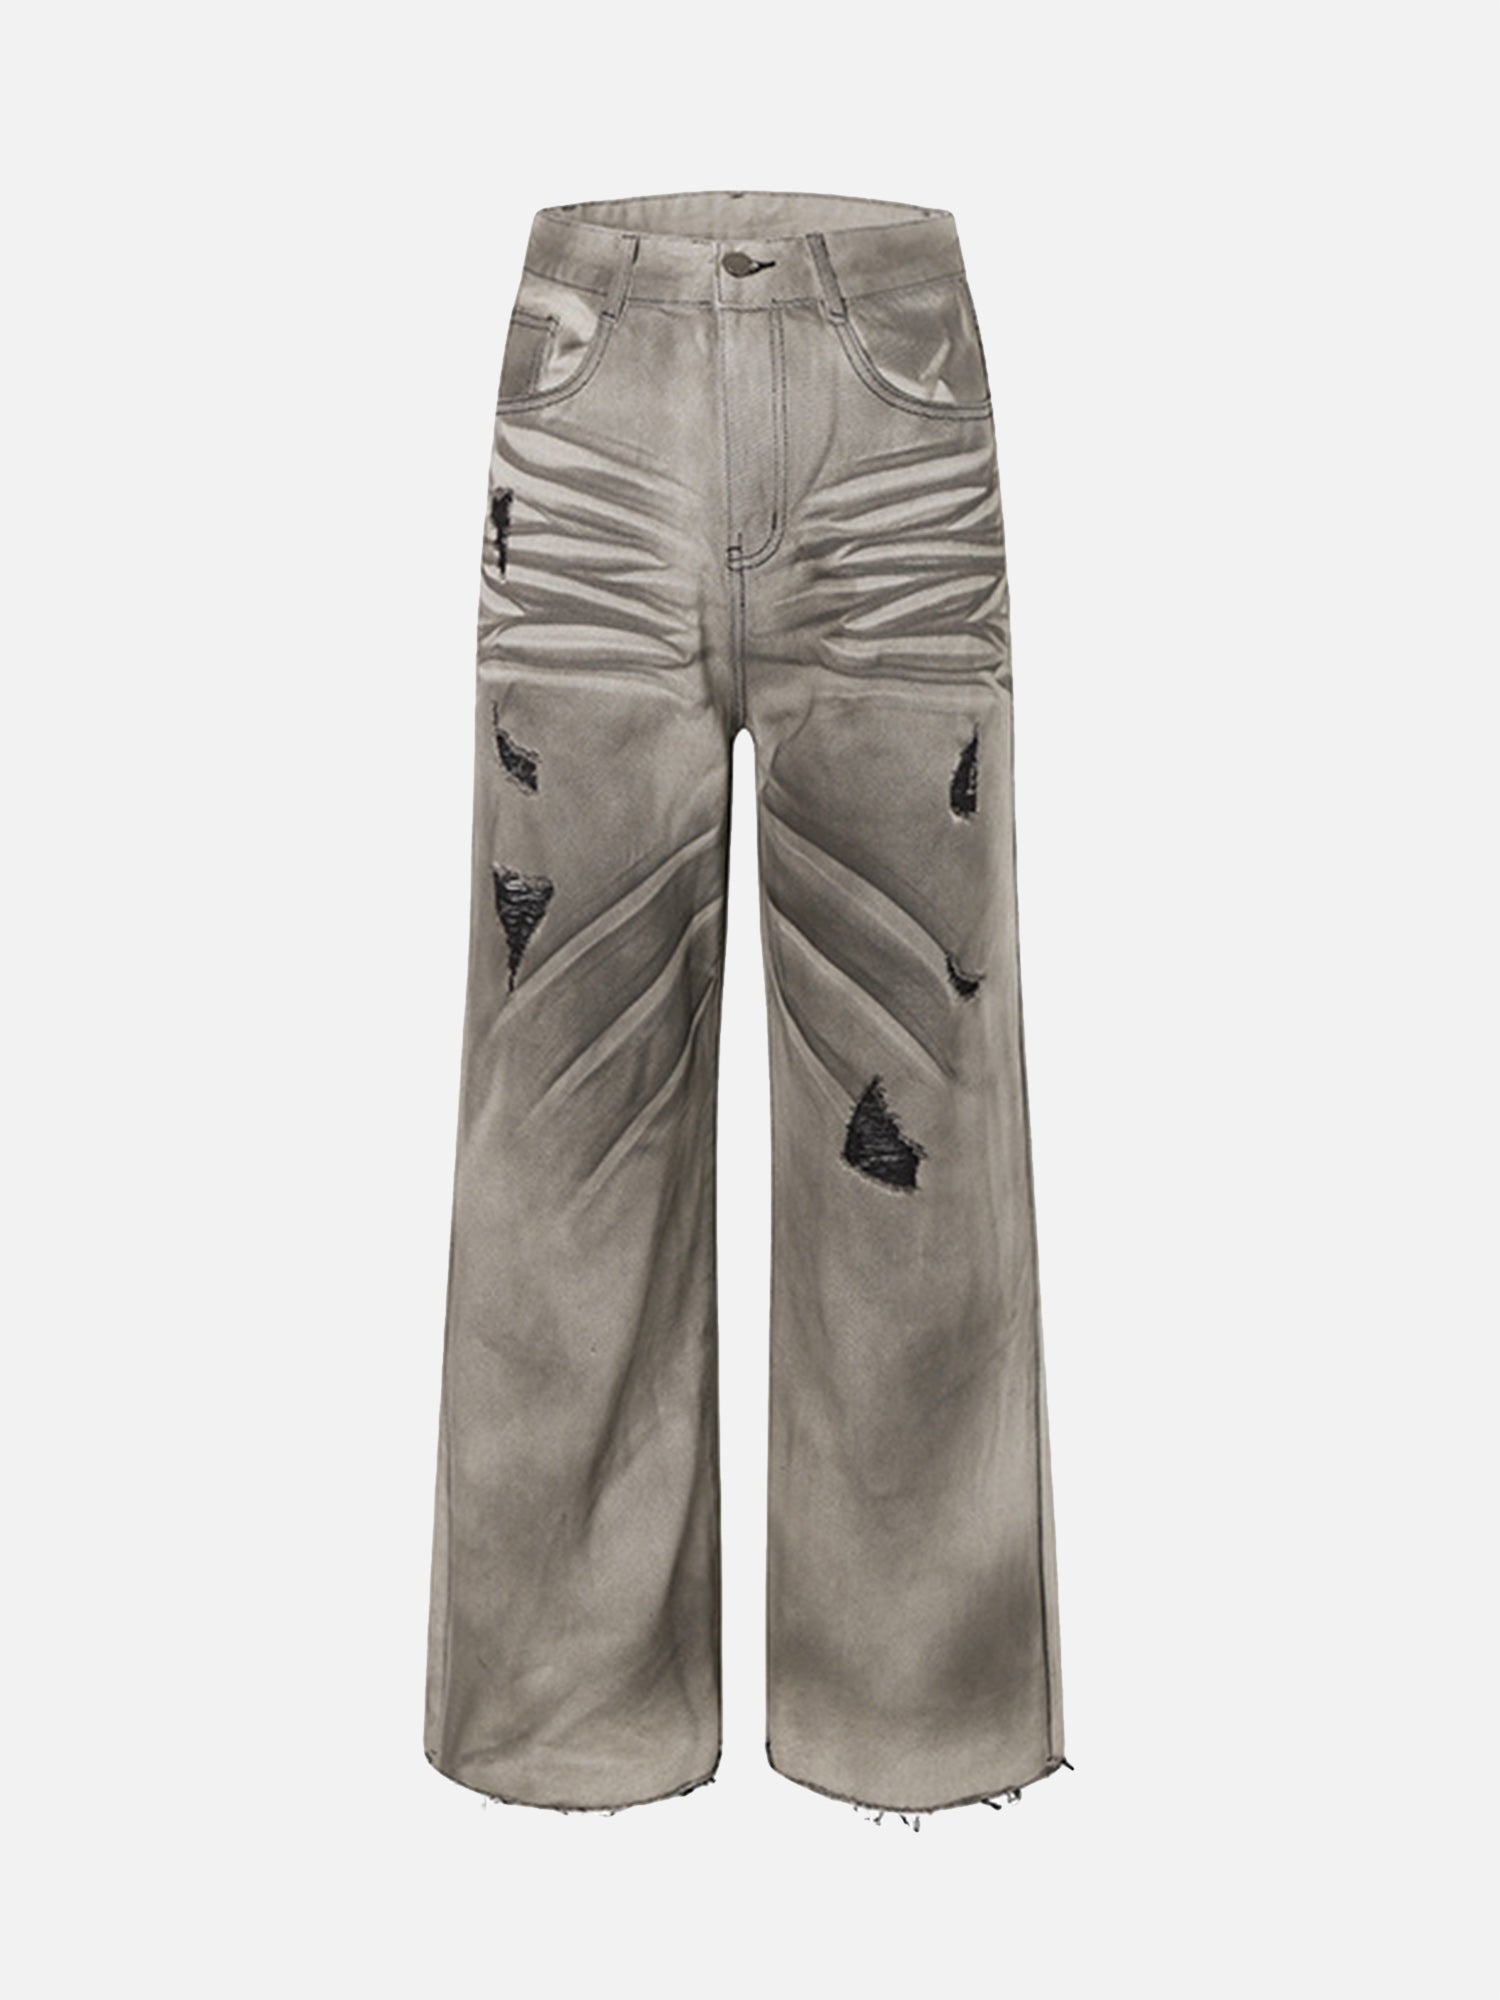 American Street Fashion Washed Distressed Straight Leg Jeans